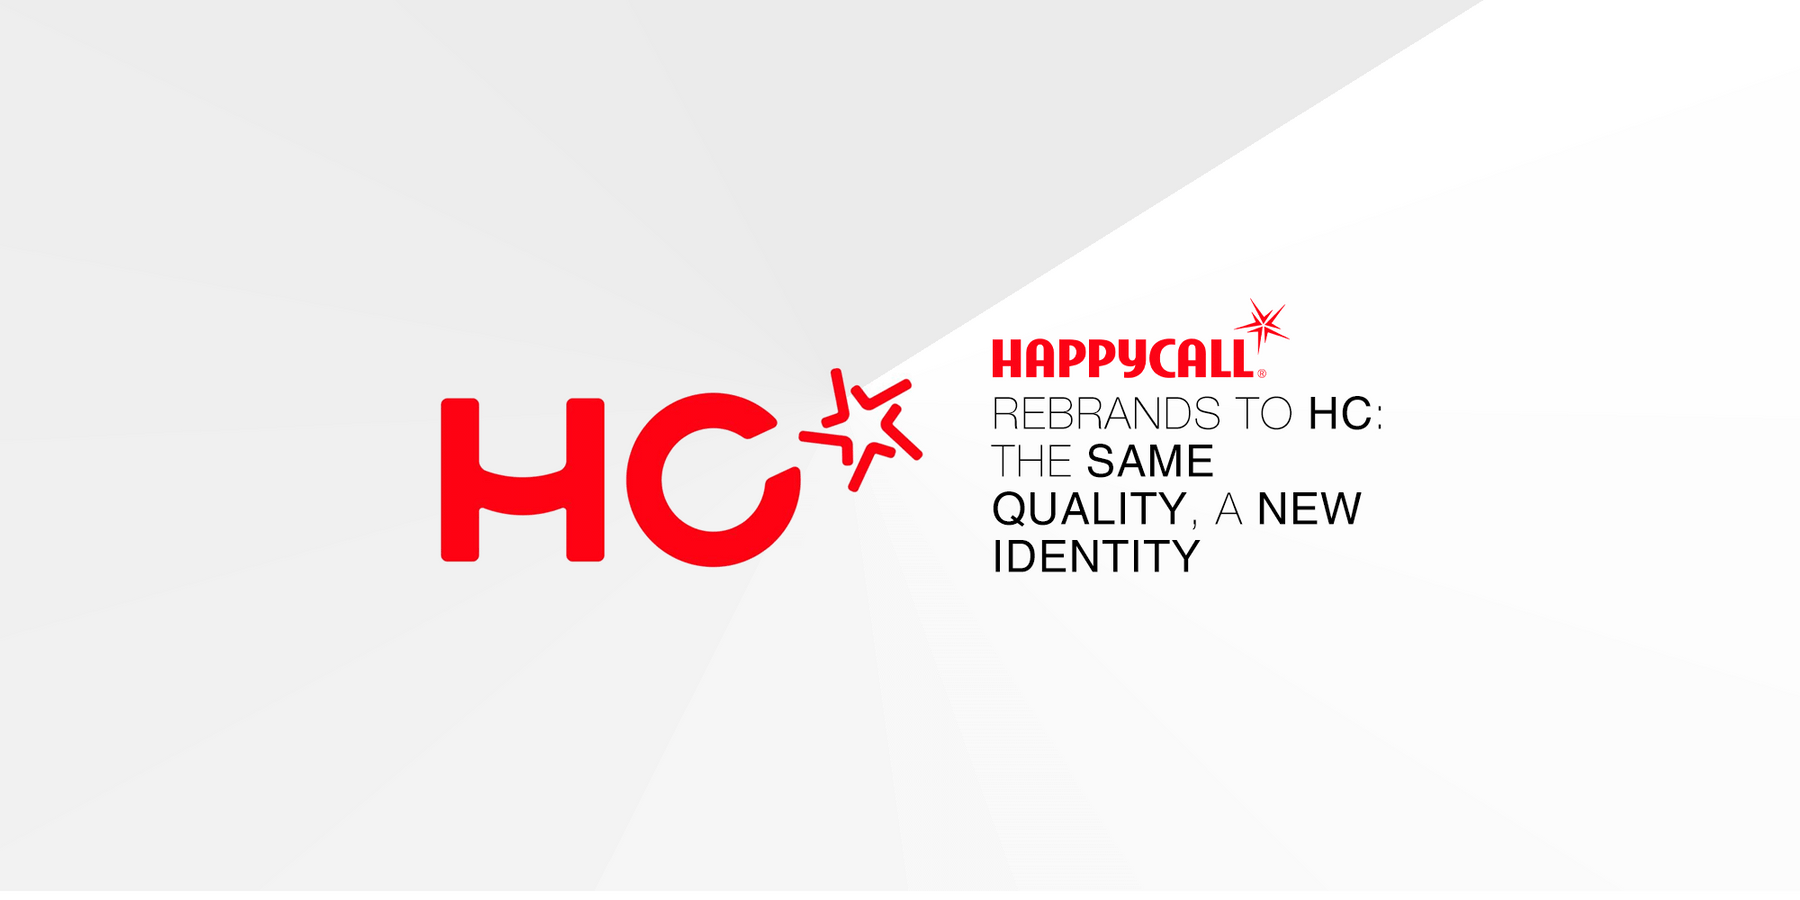 Happycall Rebrands to HC: The Same Quality, A New Identity